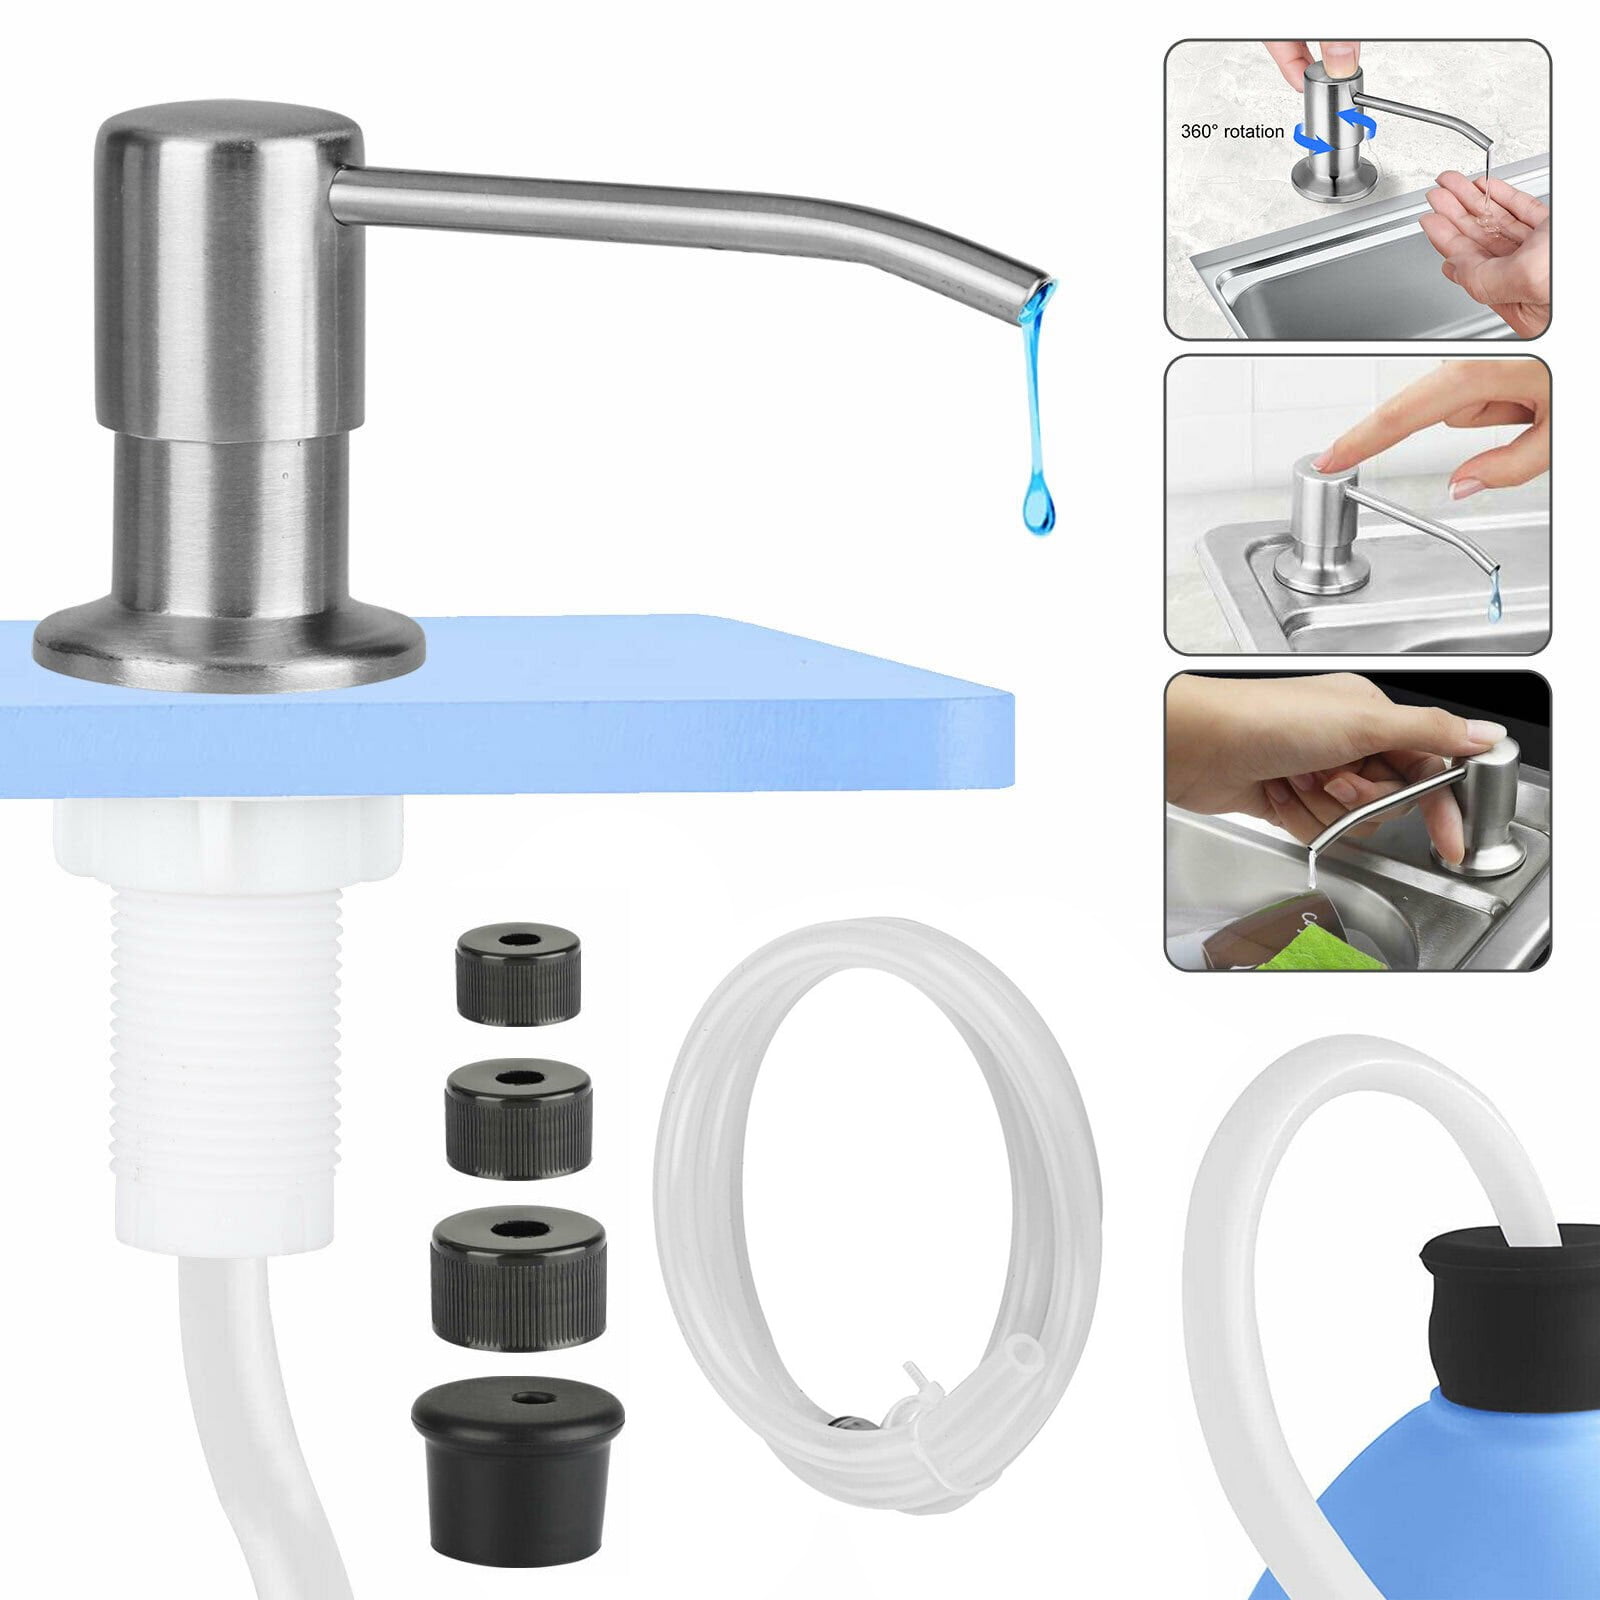 Samodra Sink Soap Dispenser and Extension Tube Kit, ABS Pump Head Bronzed  Built in Design with 39” Extension Tube to Soap Bottle, No More Messy  Refills(No Bottle)